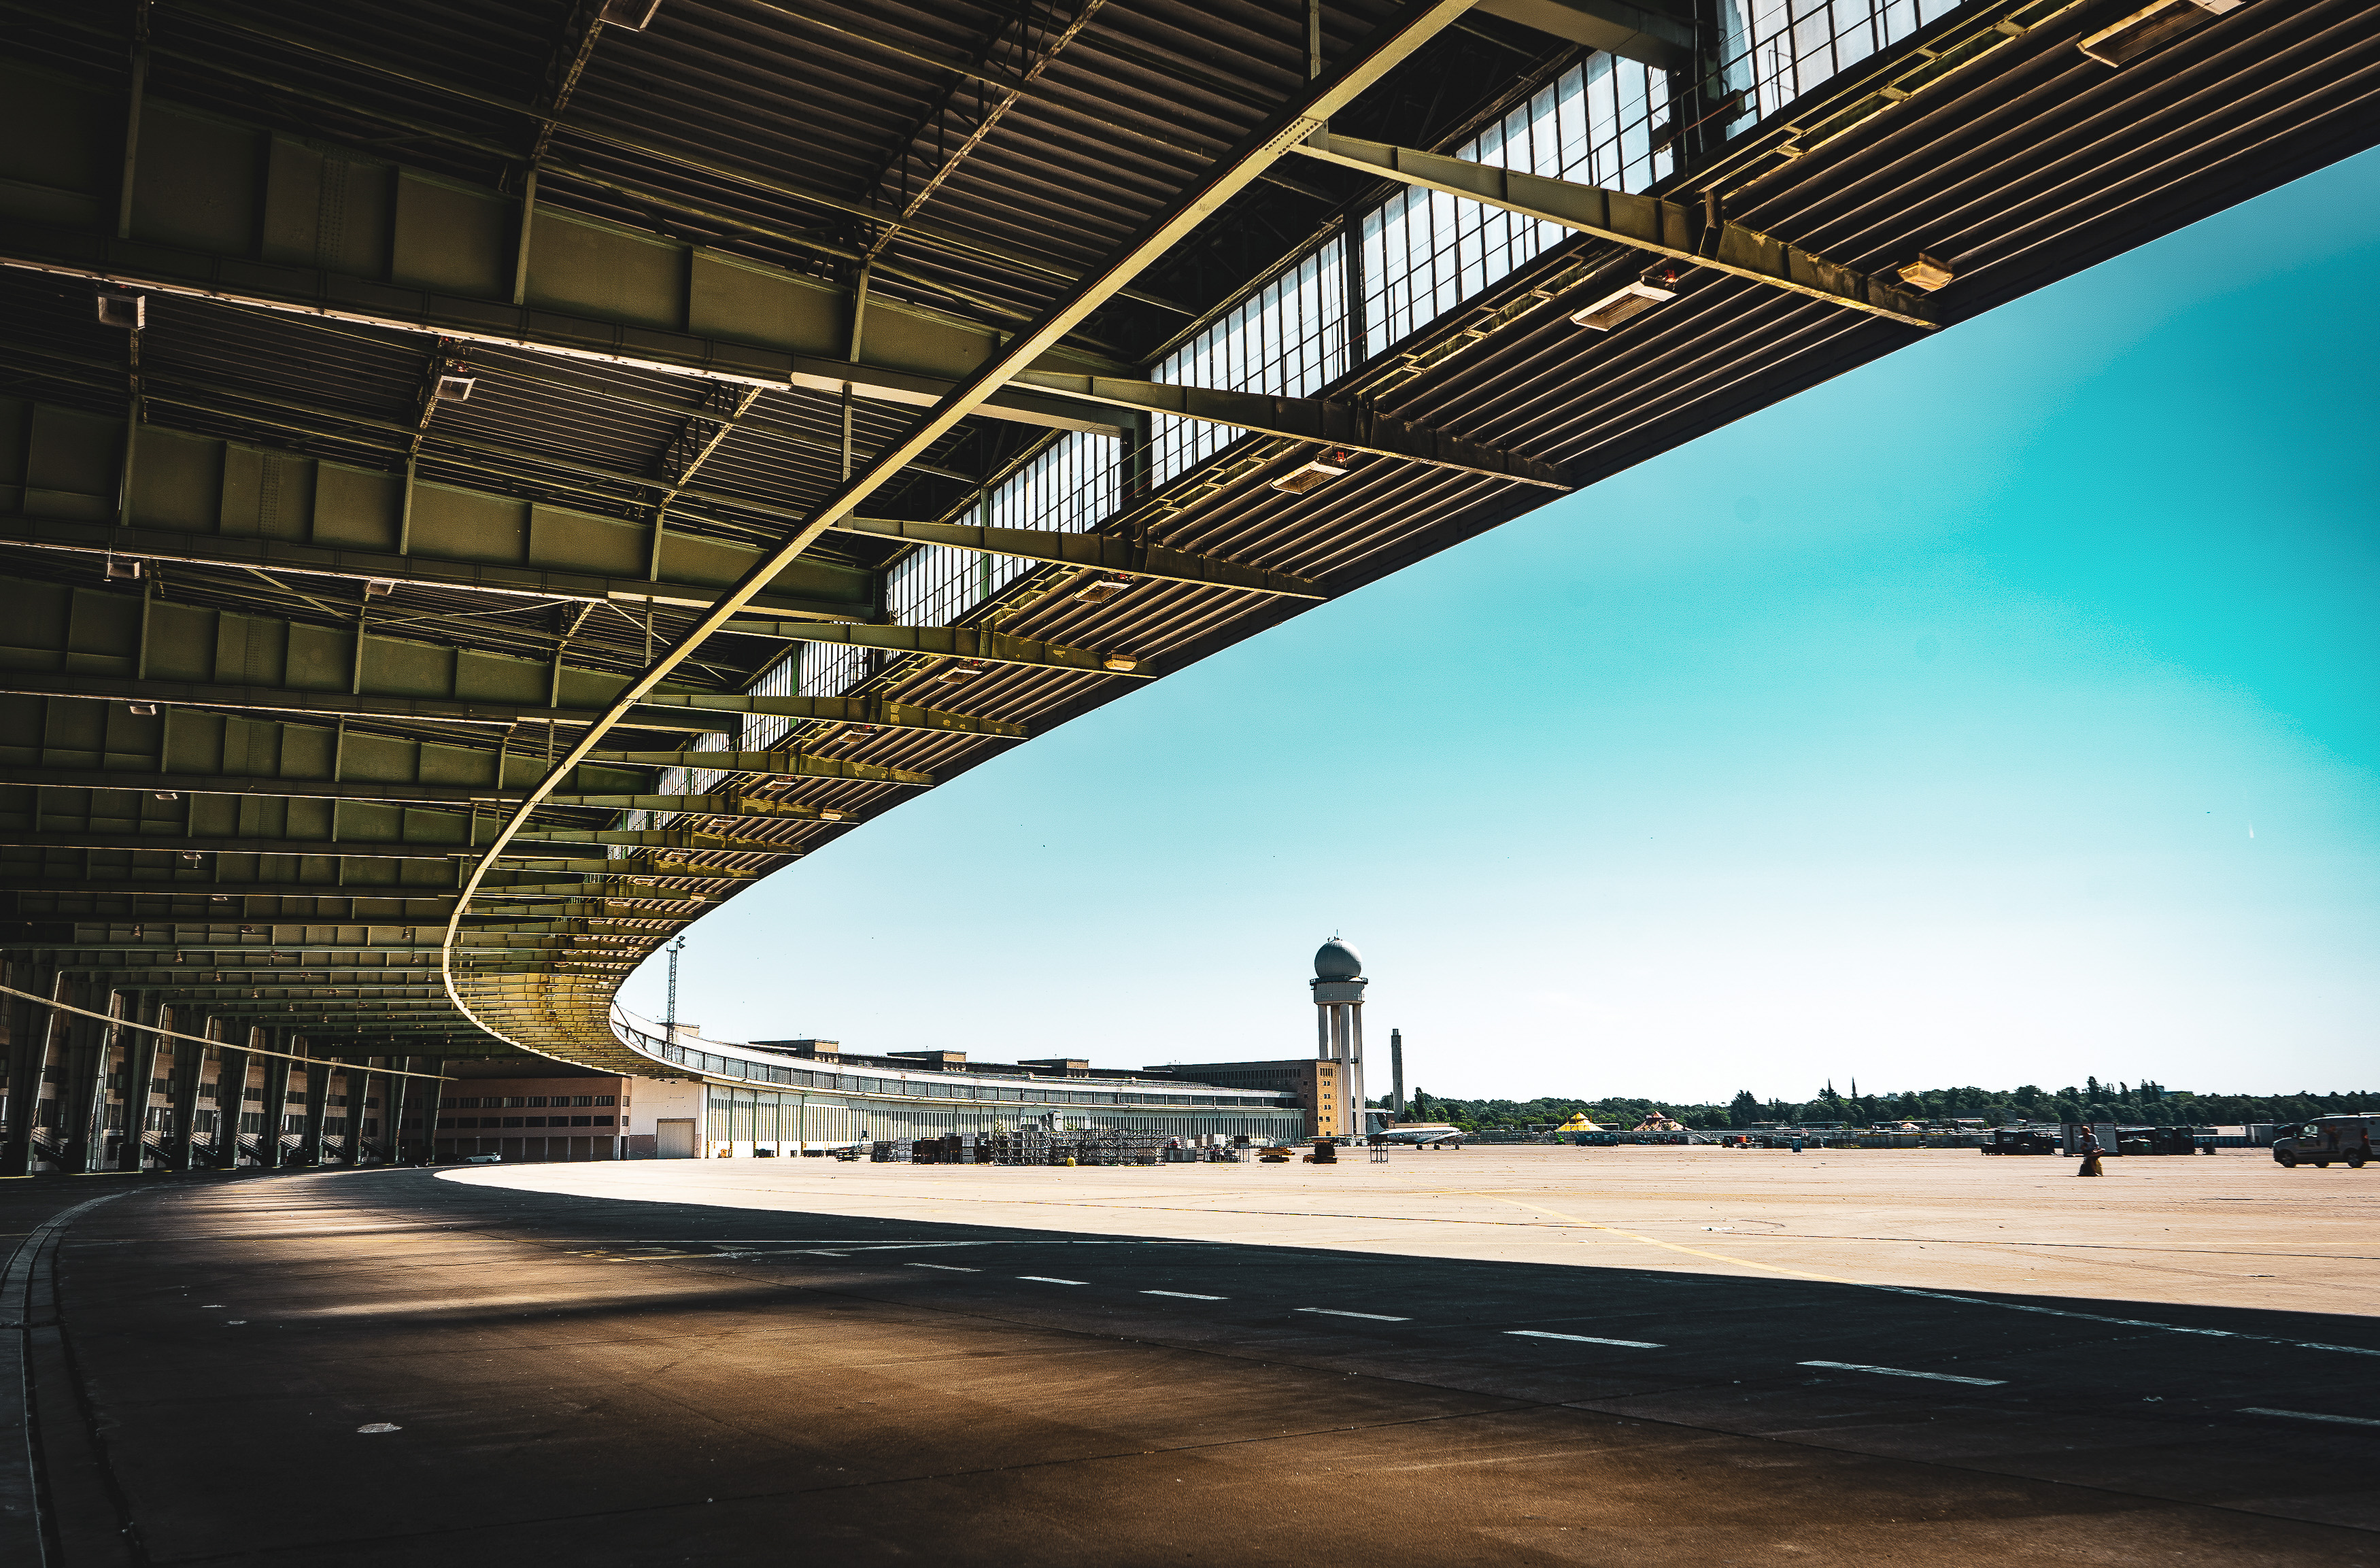 The main building and part of the former airfield of Berlin Tempelhof Airport in sunshine.